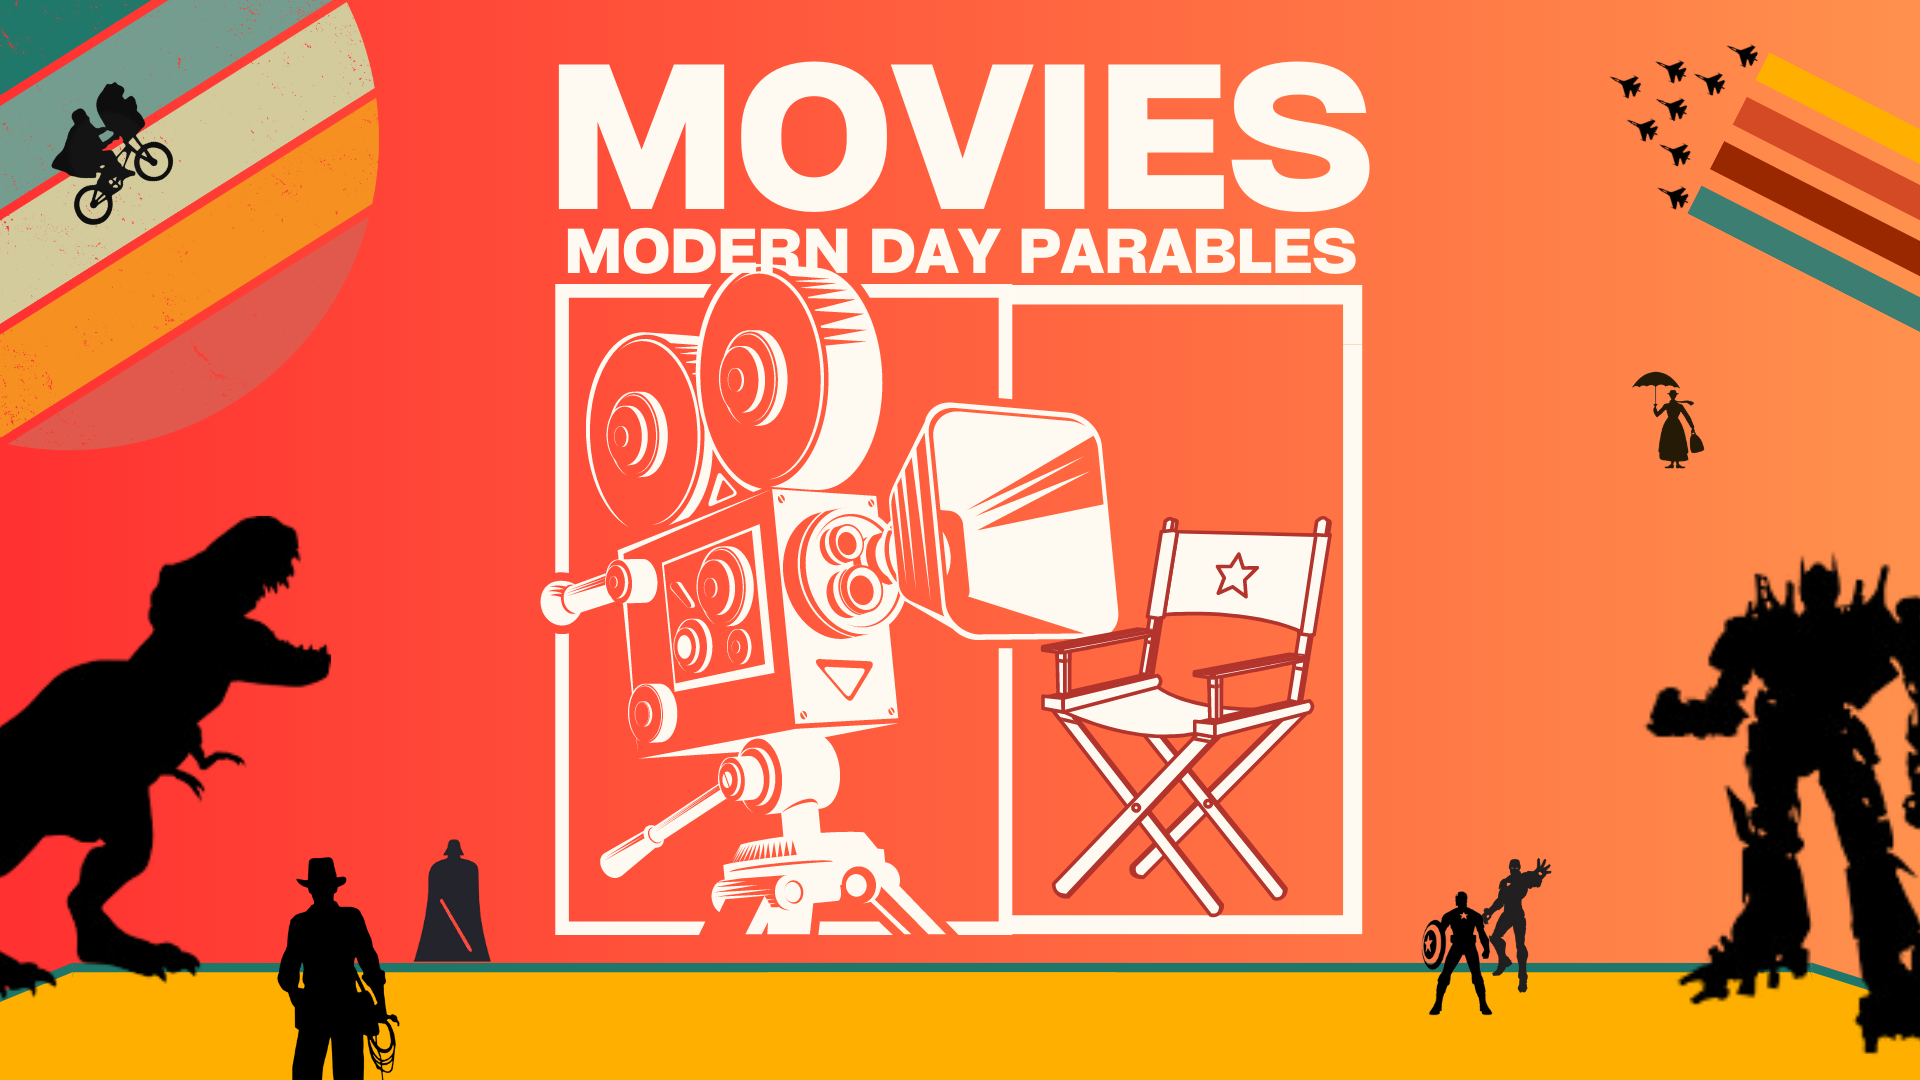 Movies Modern Day Parables, Week 2